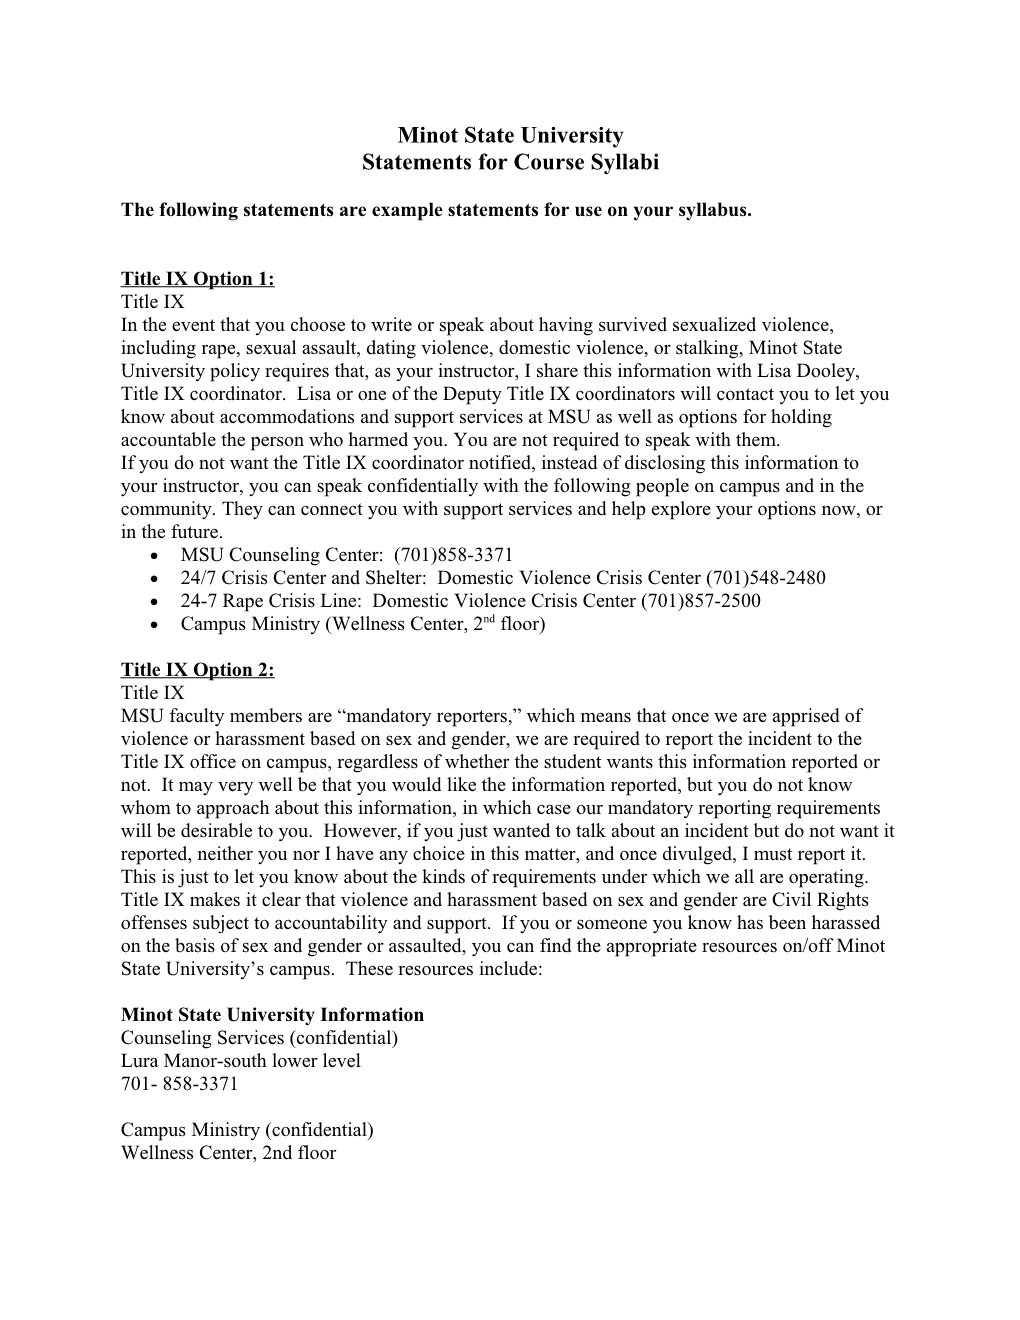 Statements for Course Syllabi